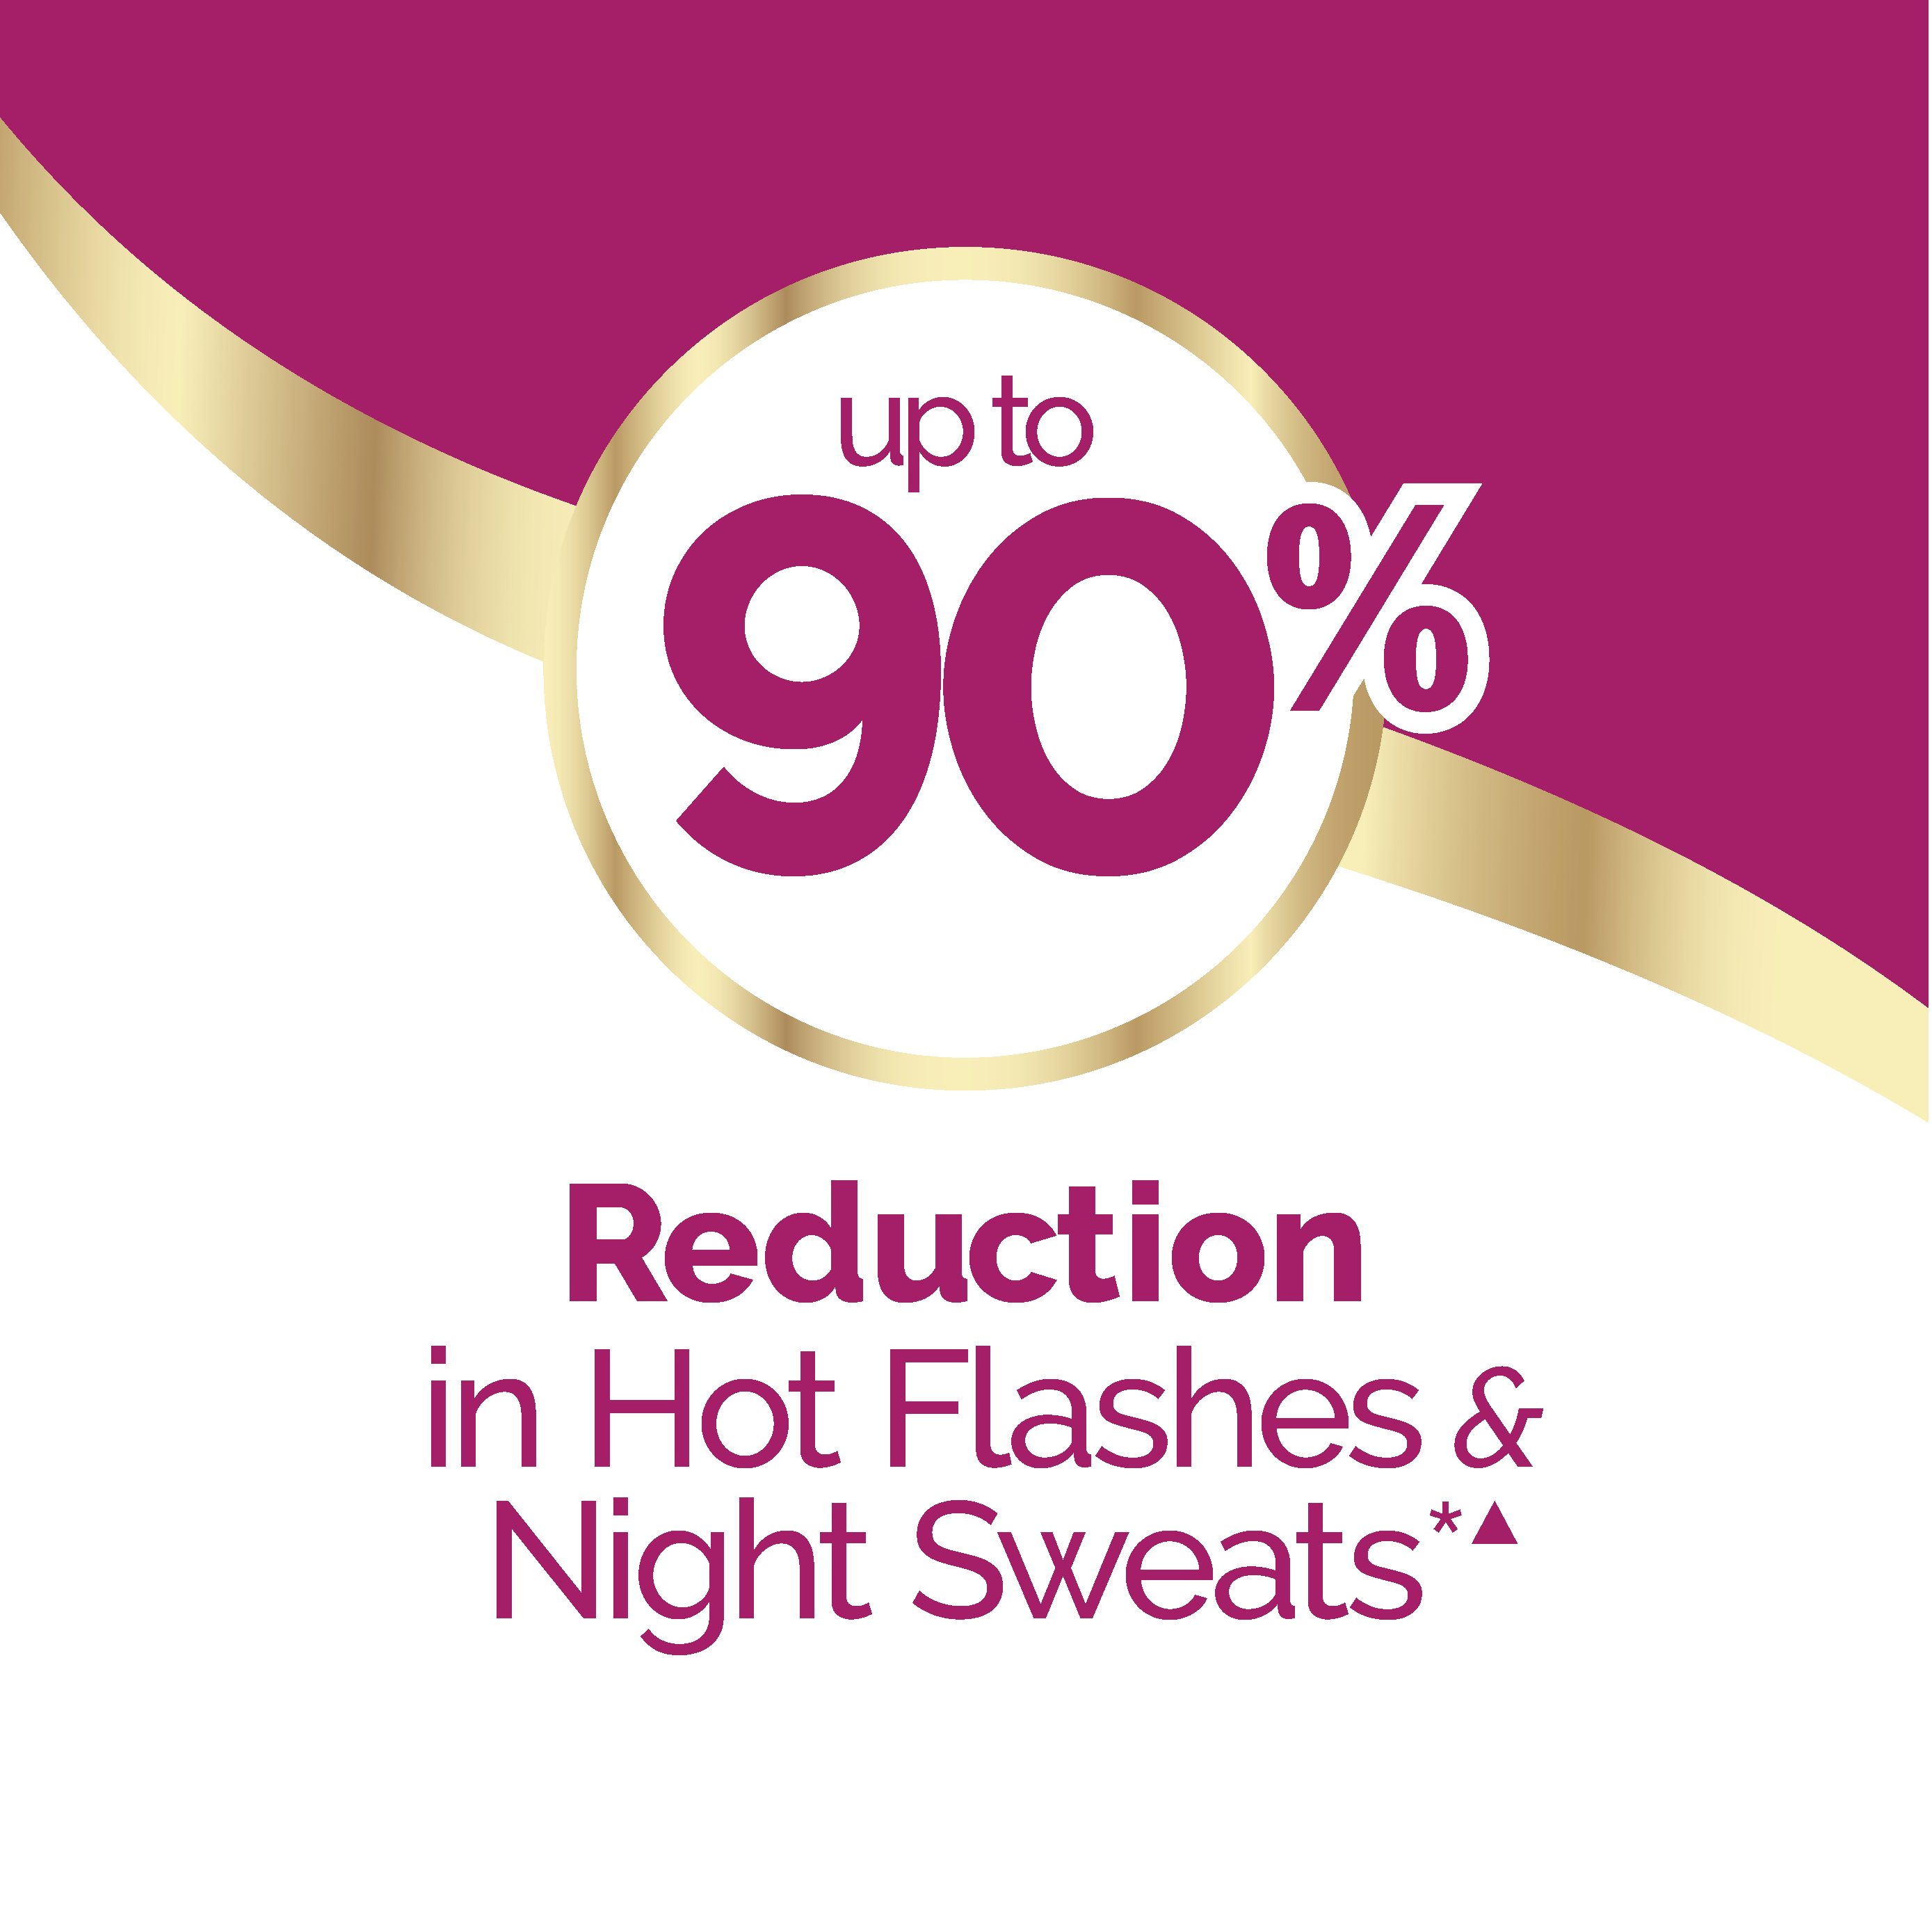 Reduction in Hot Flashes and Night Sweats Image